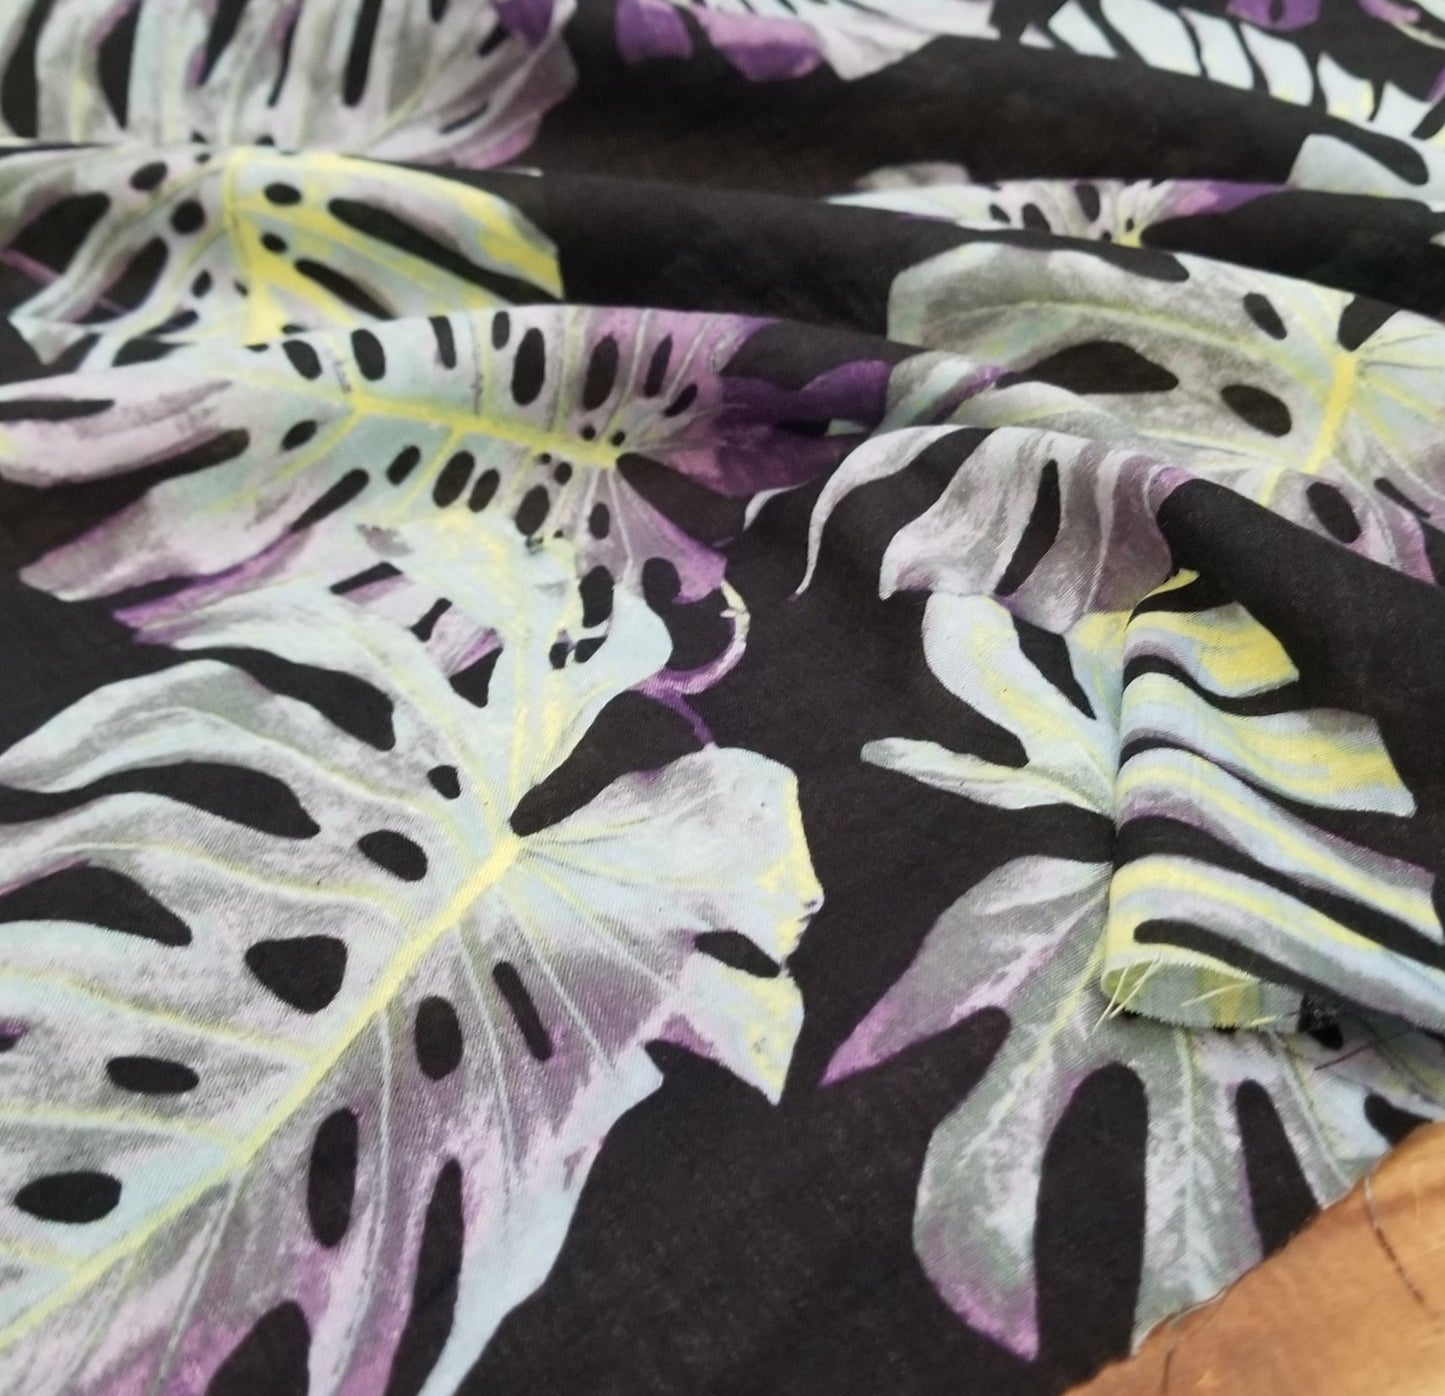 Designer Deadstock Black and Lime Monstera Foliage Cross Hatch Cotton Lawn 2.36 oz - Sold by the yard